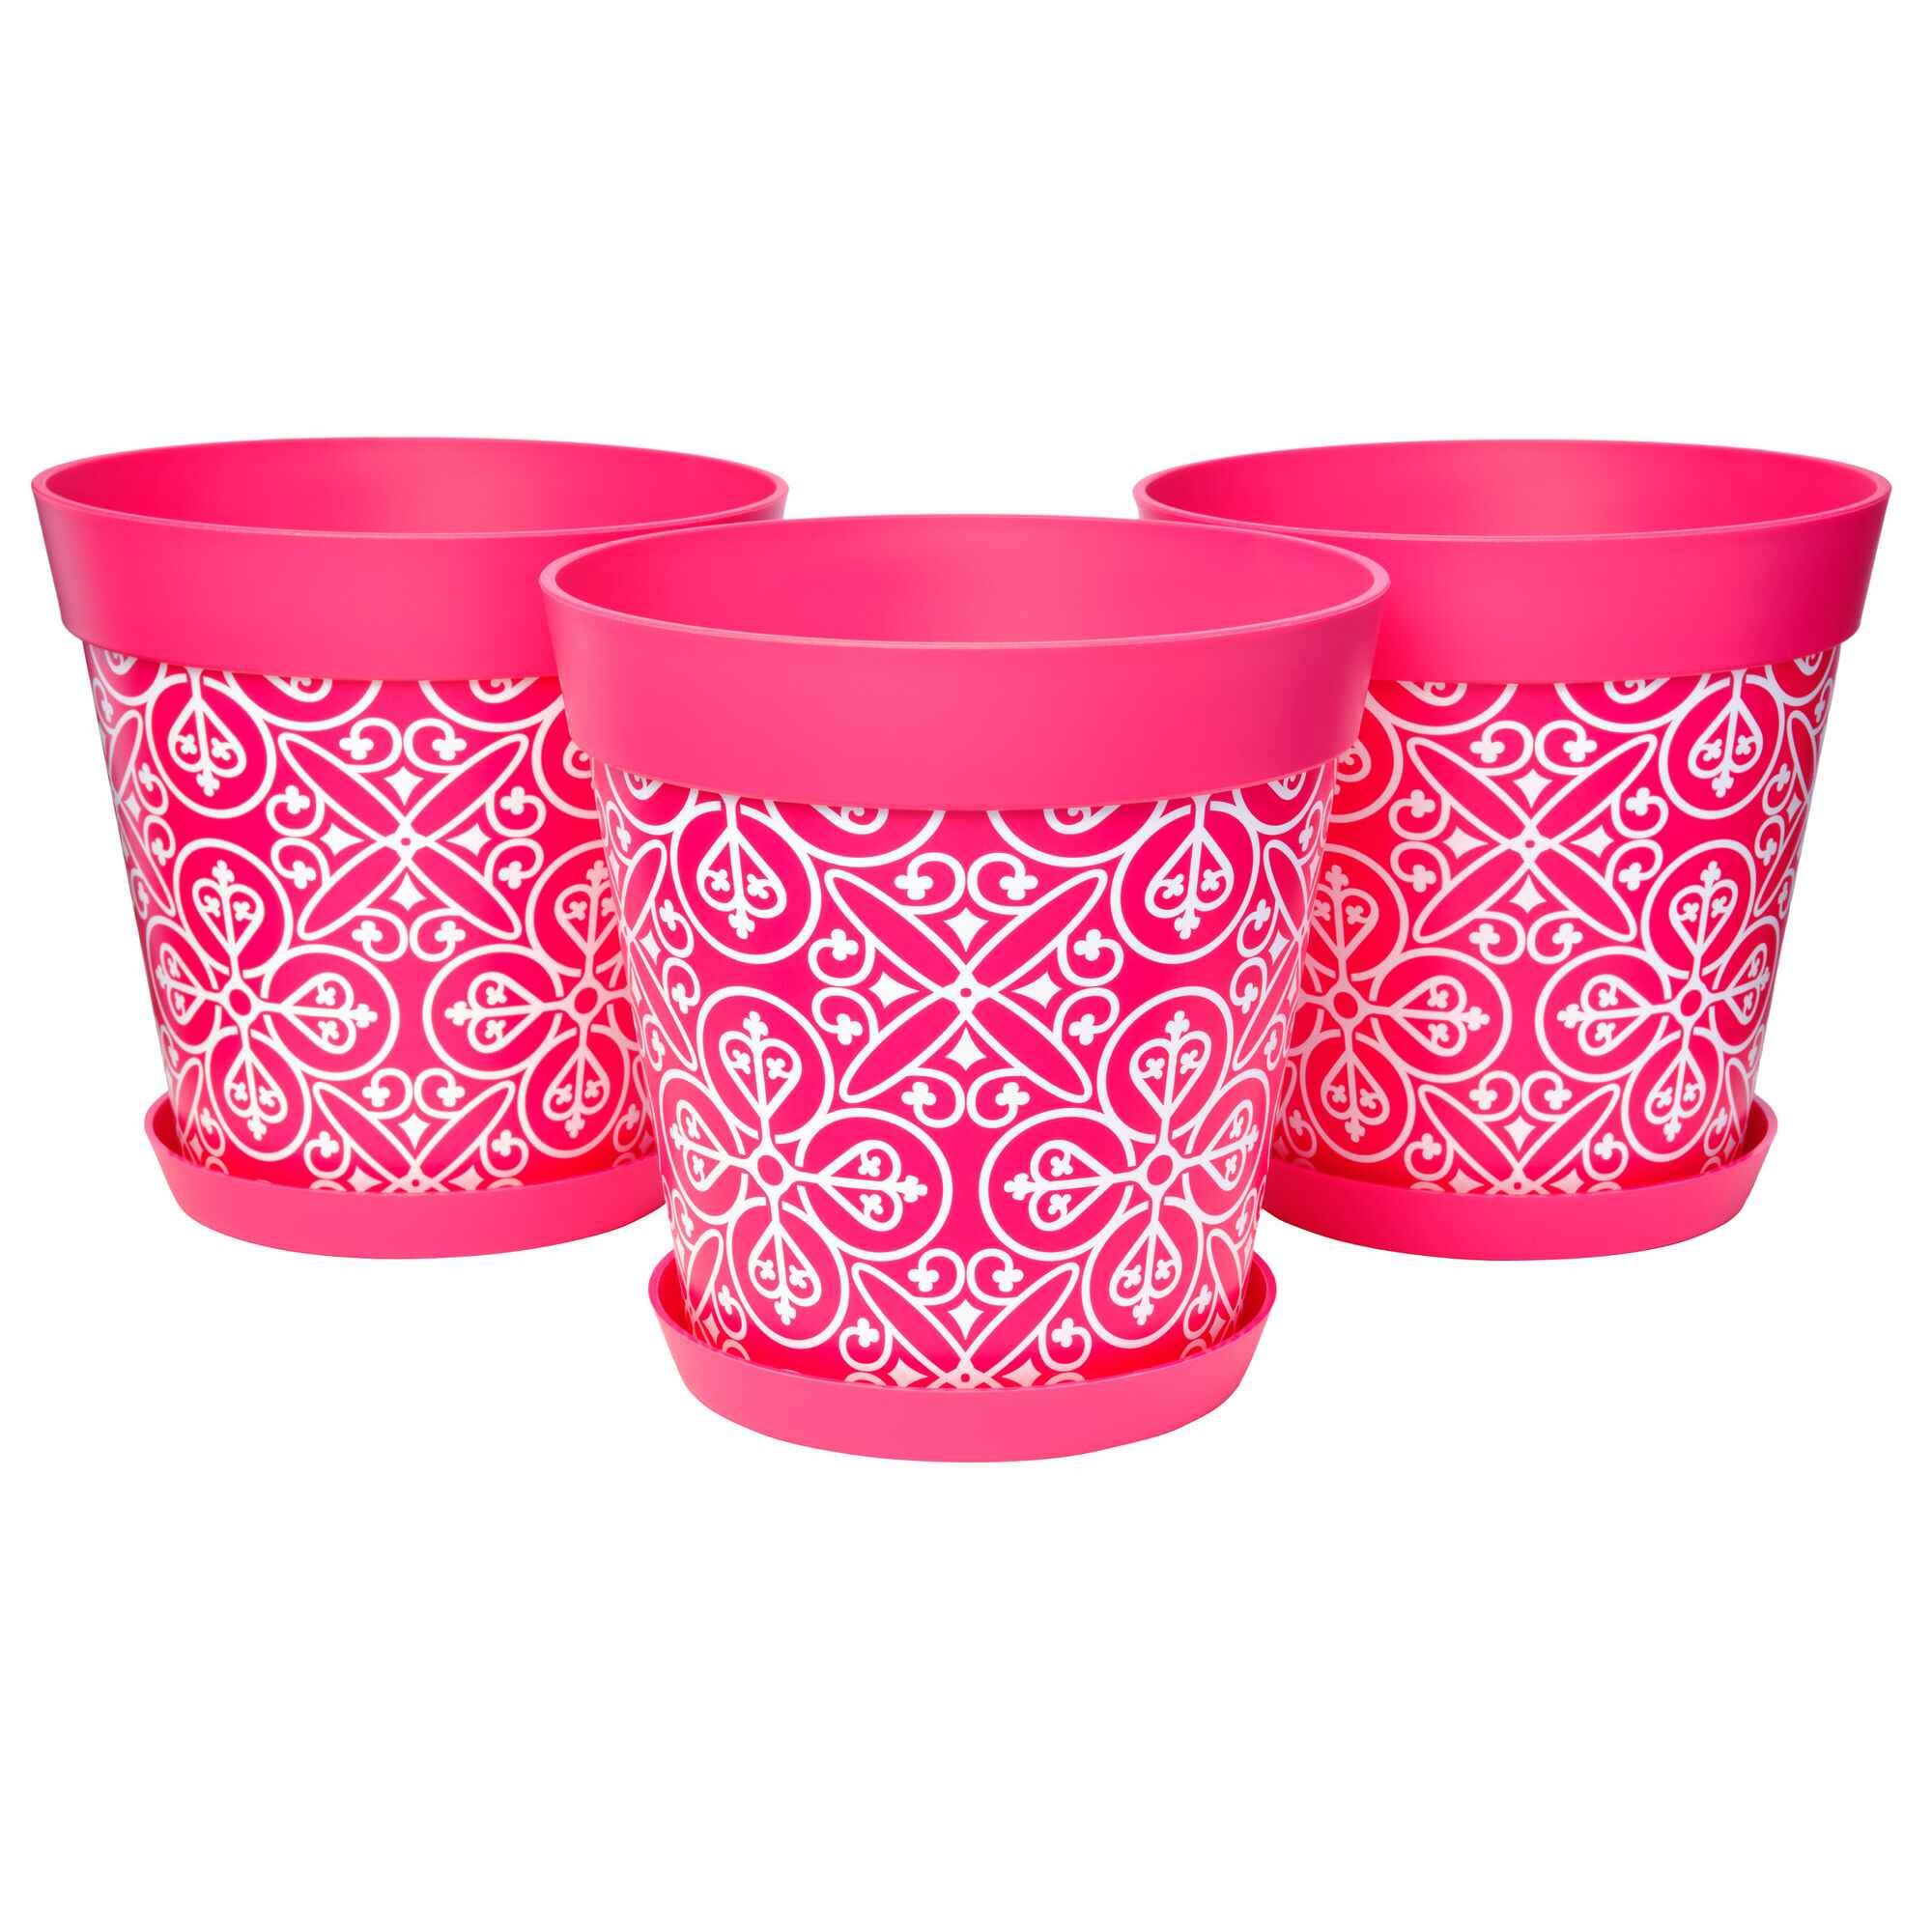 Picture of 3 Large 25cm Plastic Pink Moroccan Style Indoor/Outdoor Flowerpots with Saucers 